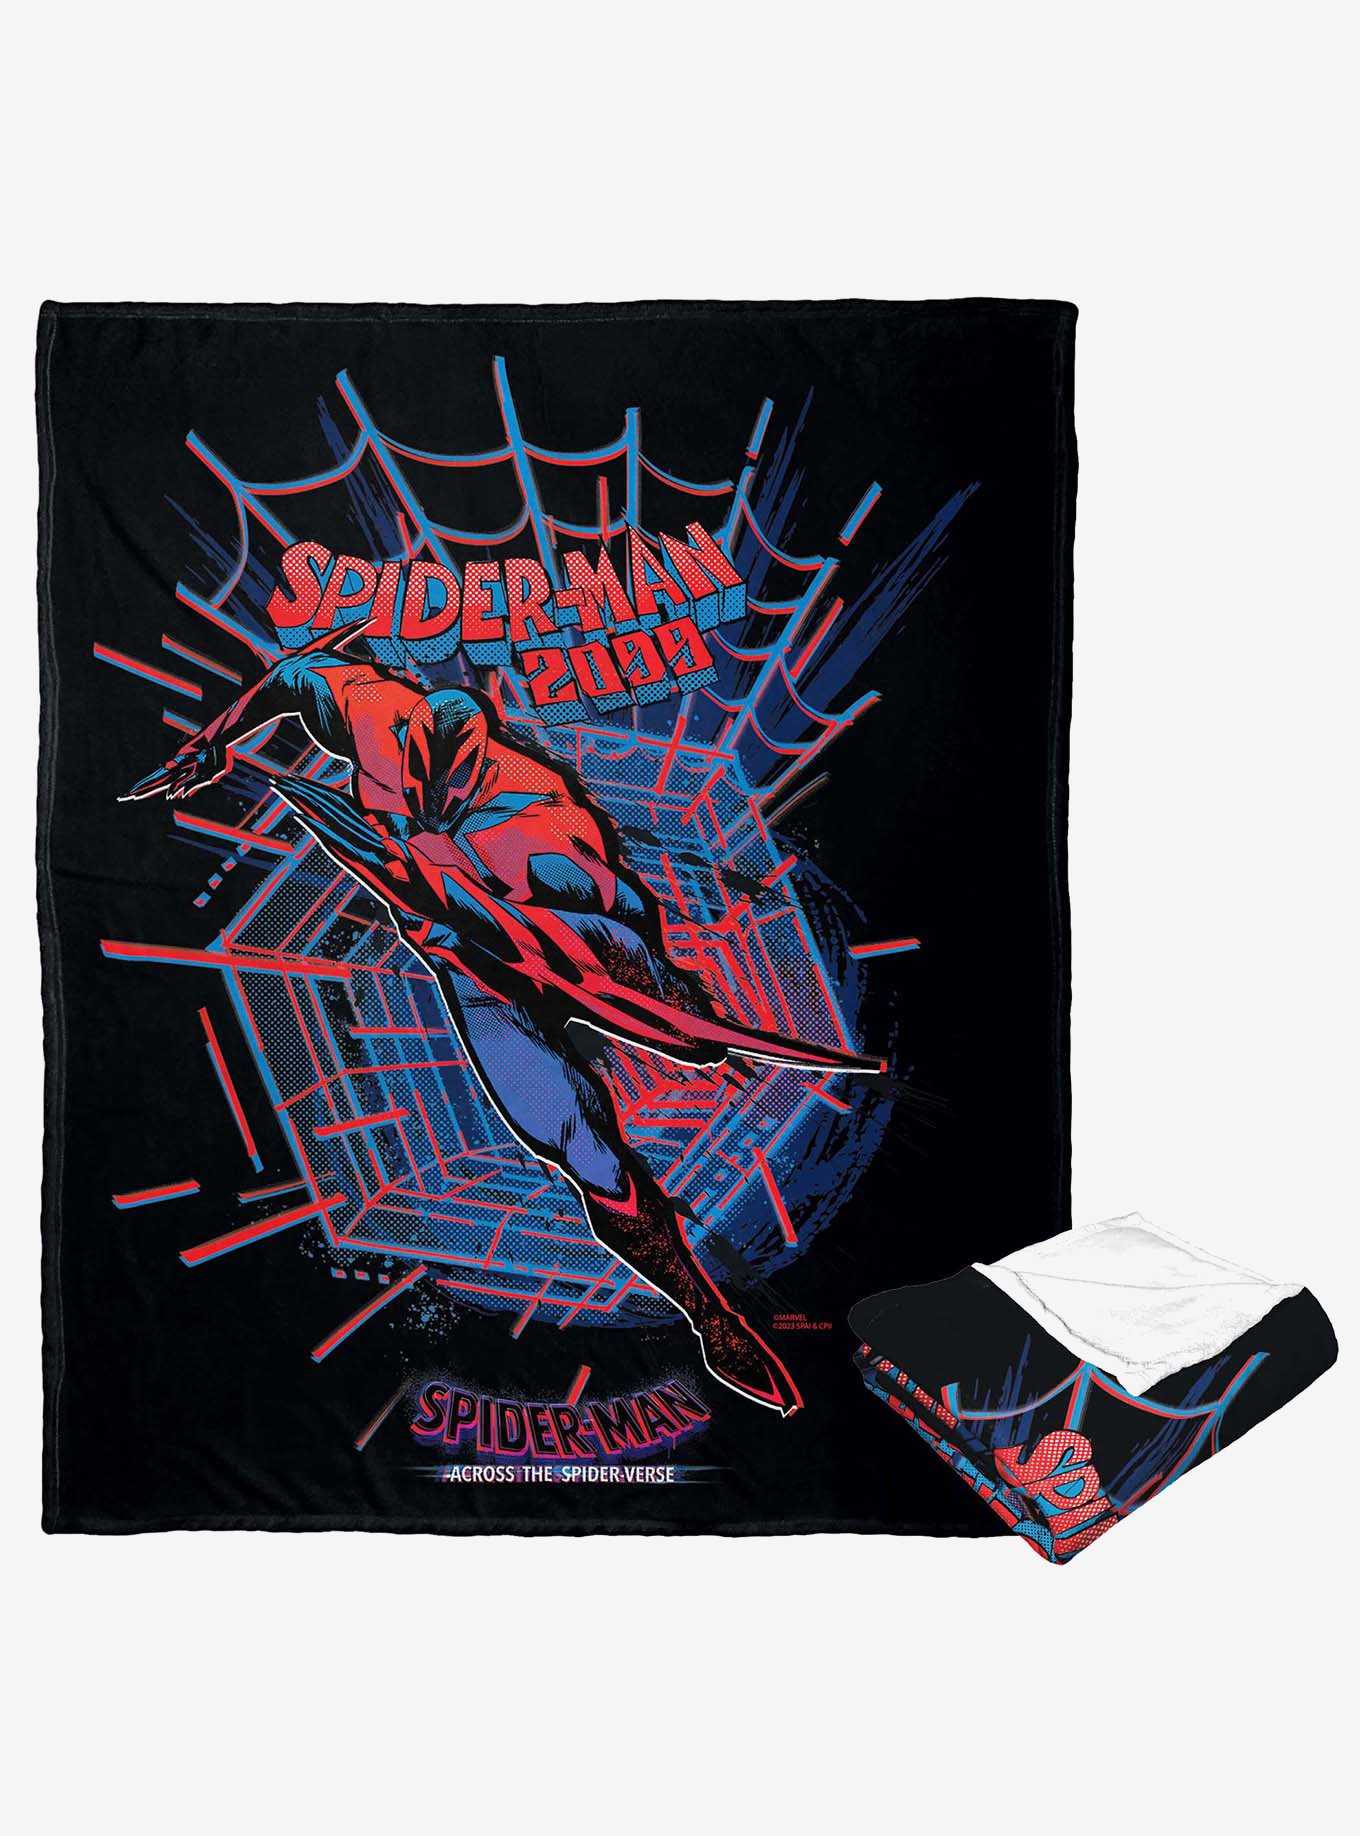 Marvel Spider-Man Across The Spiderverse Spider-Man 2099 Silk Touch Throw Blanket, , hi-res